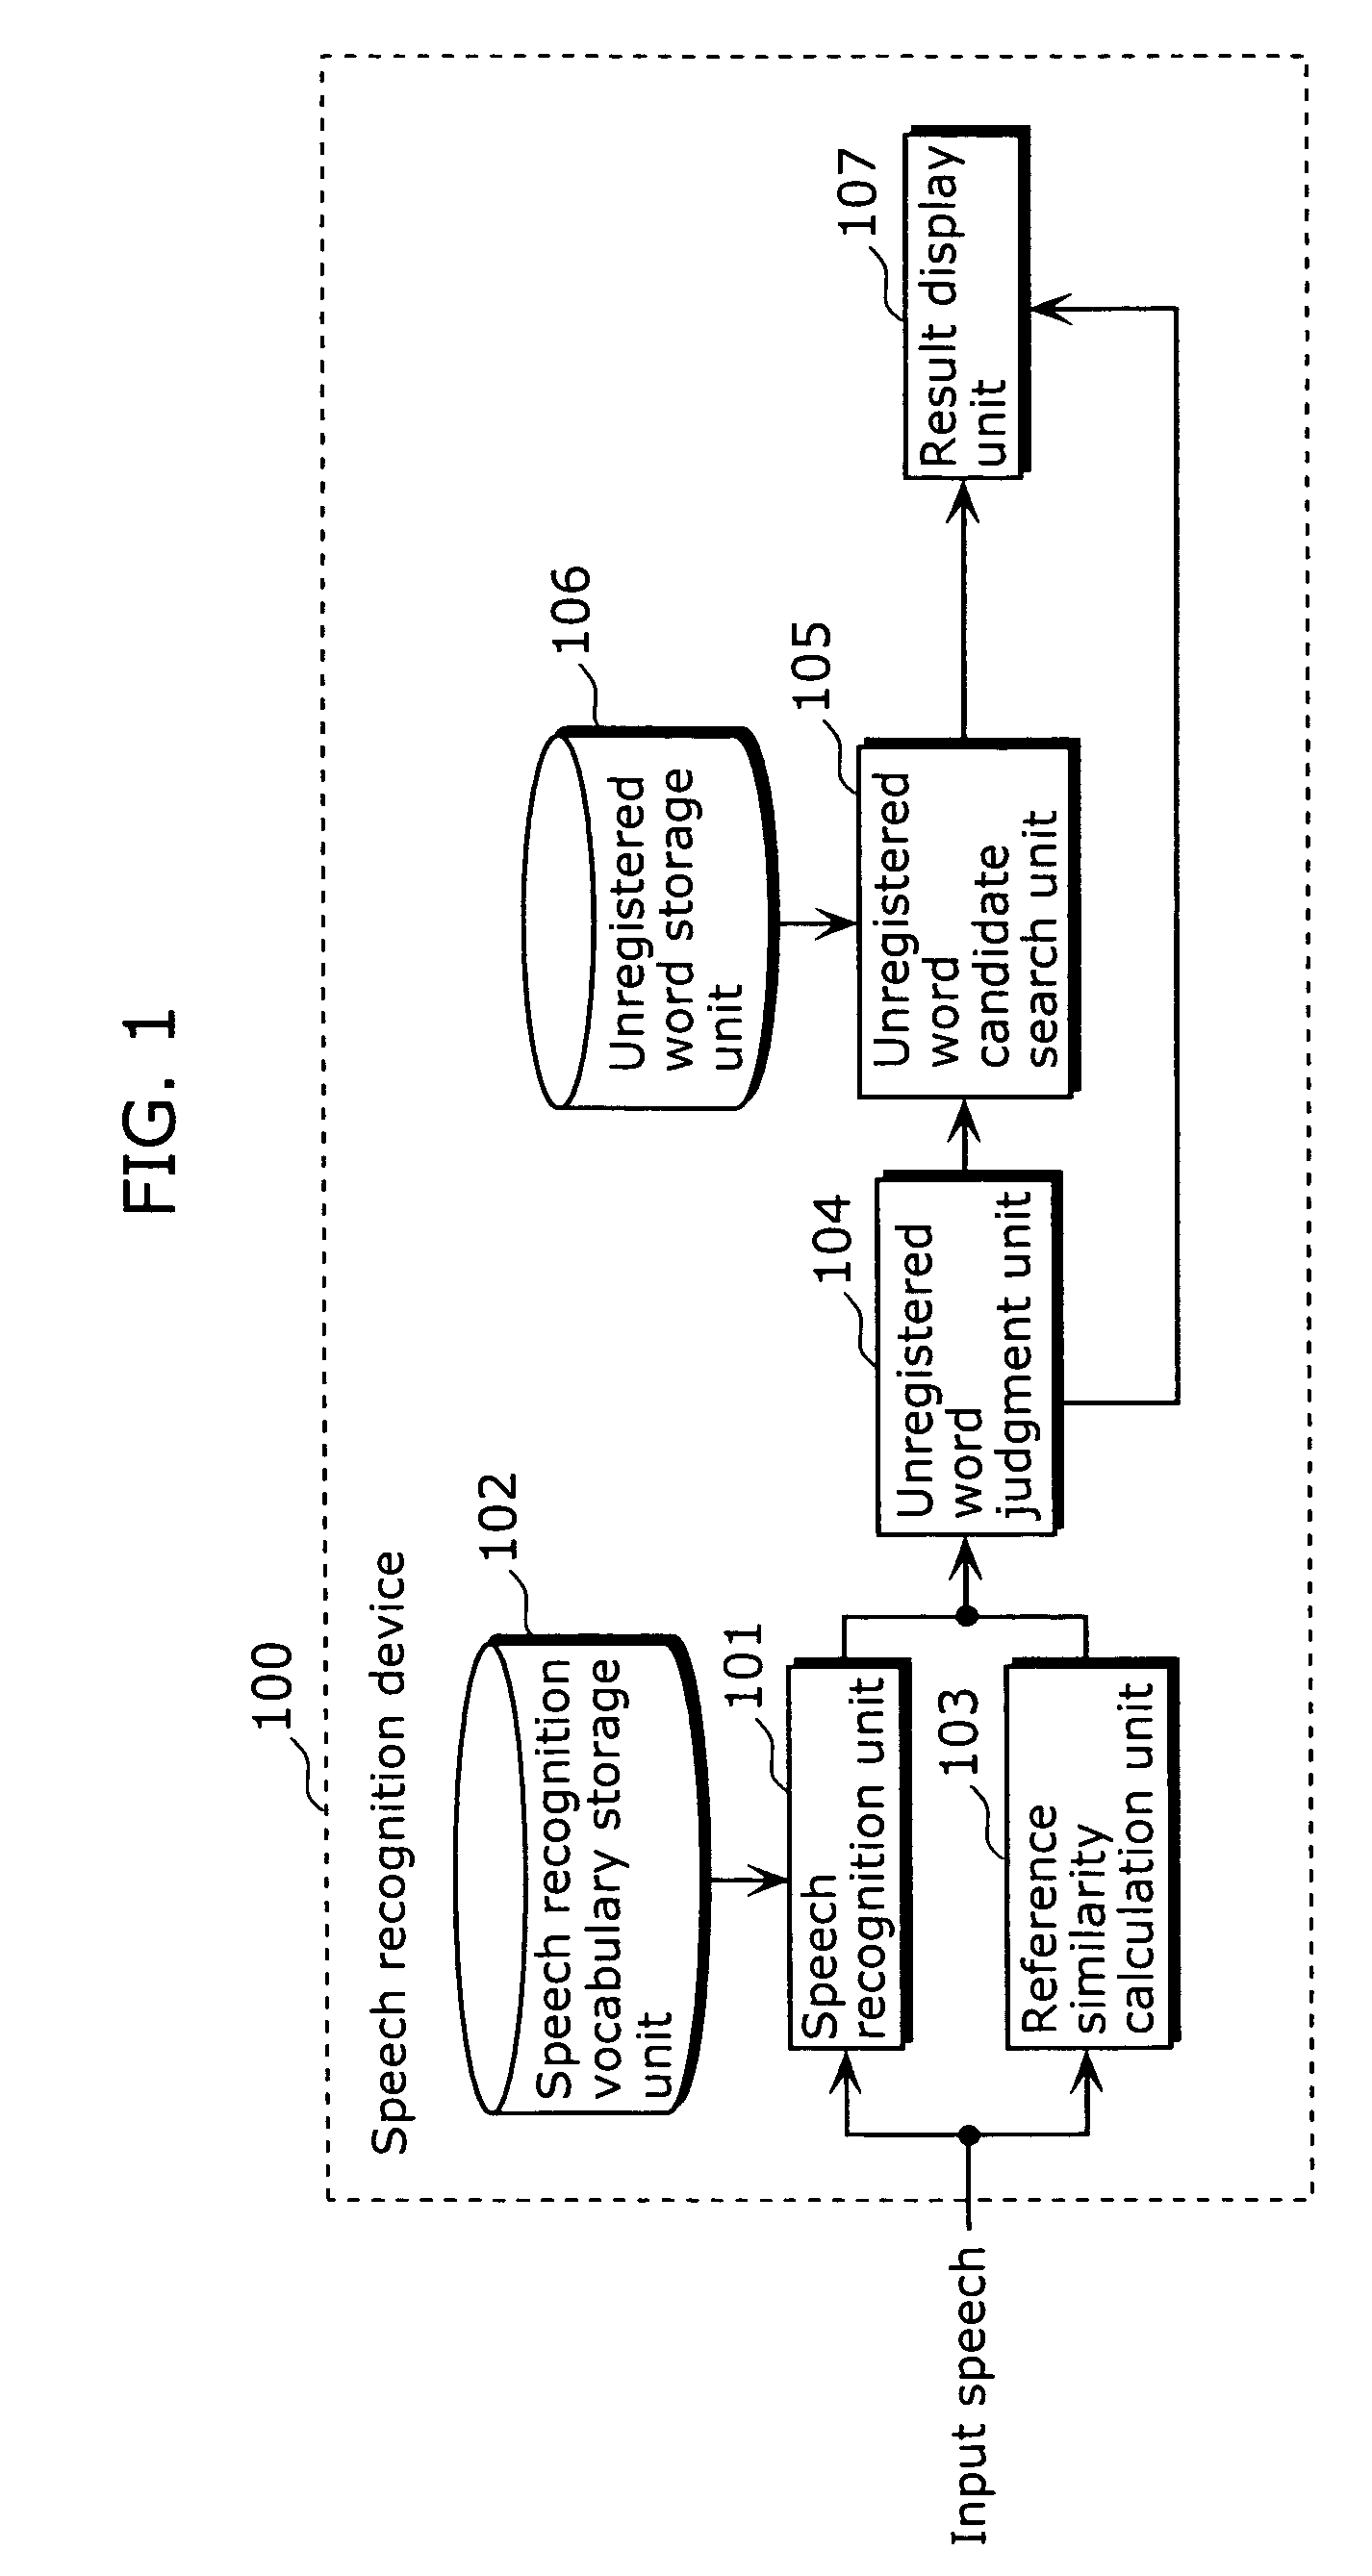 Speech recognition device, speech recognition method, and program